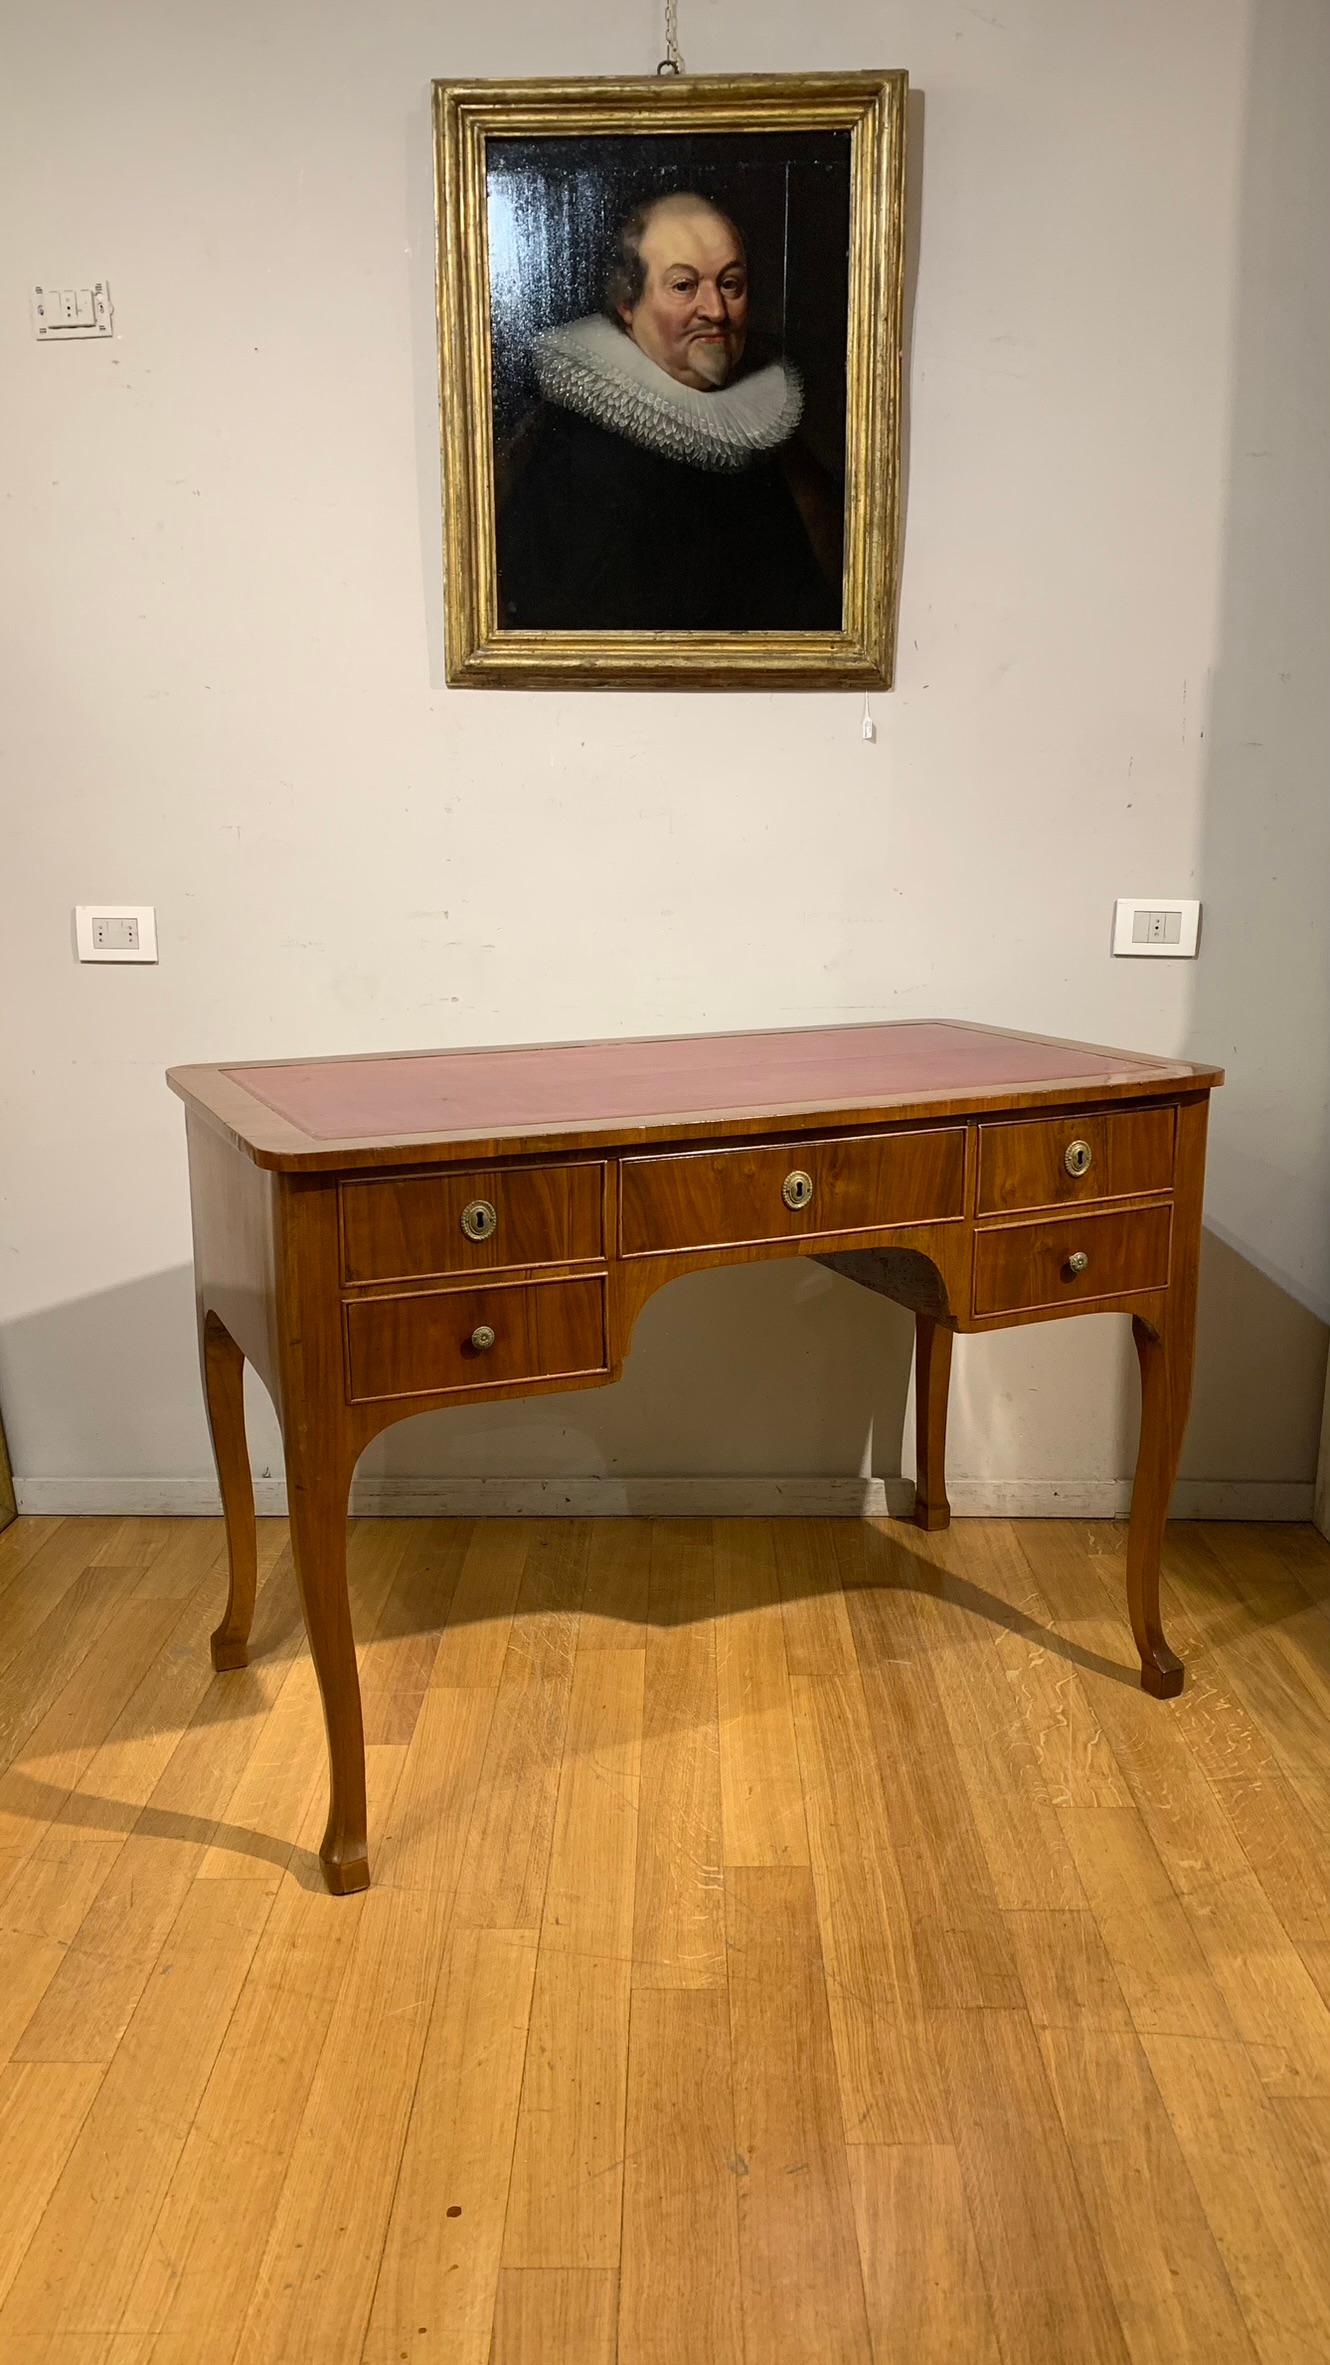 Beautiful writing table veneered in walnut with top partially covered in red-purple leather and highlighted in gold.
Five drawers, four of which are smaller on the sides and one in the centre, wavy legs.
Tuscan manufacture from the end of the